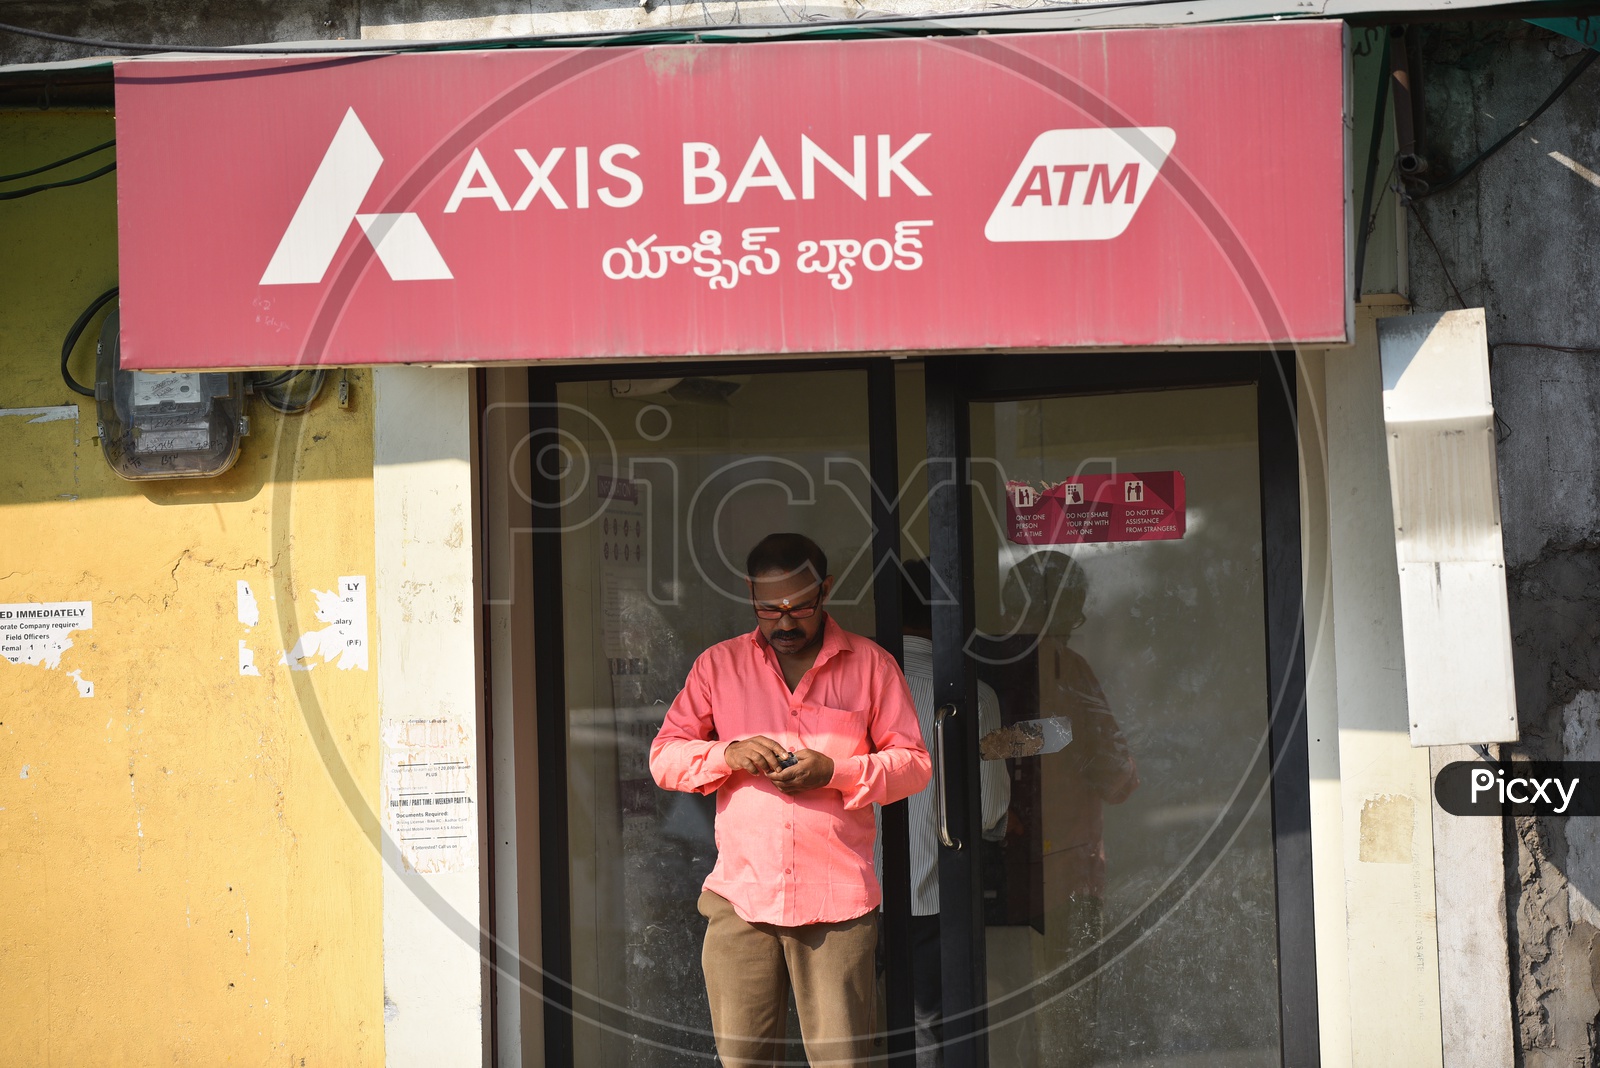 People withdrawing Cash from Axis Bank ATM